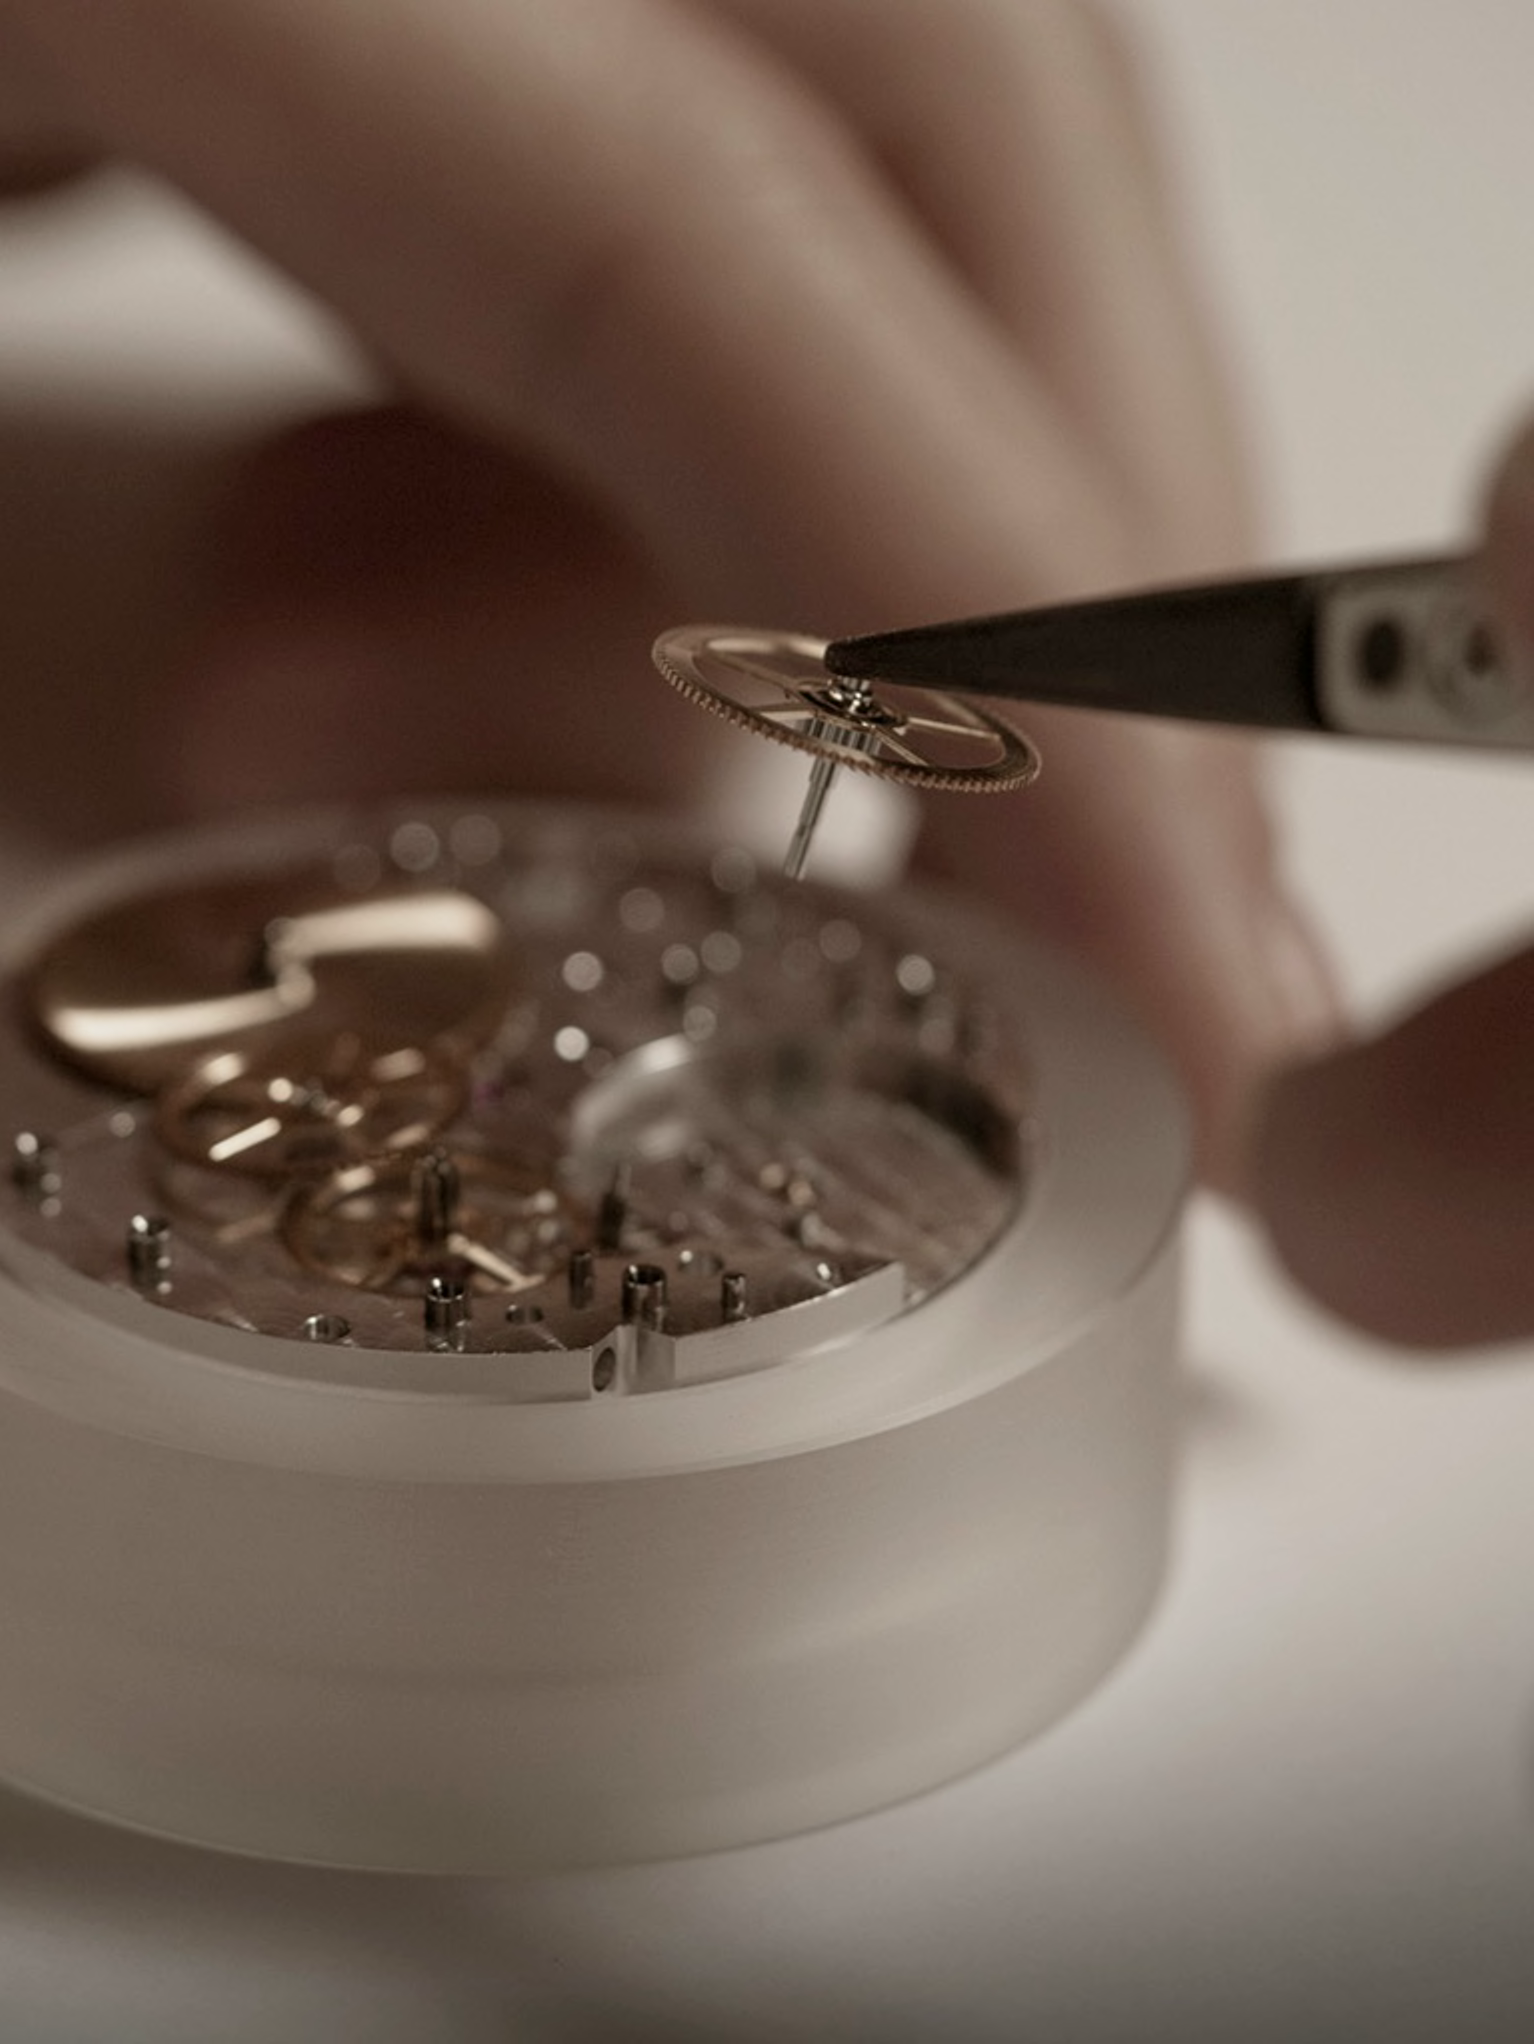 Mégane examining the watch movement in action through the transparent caseback